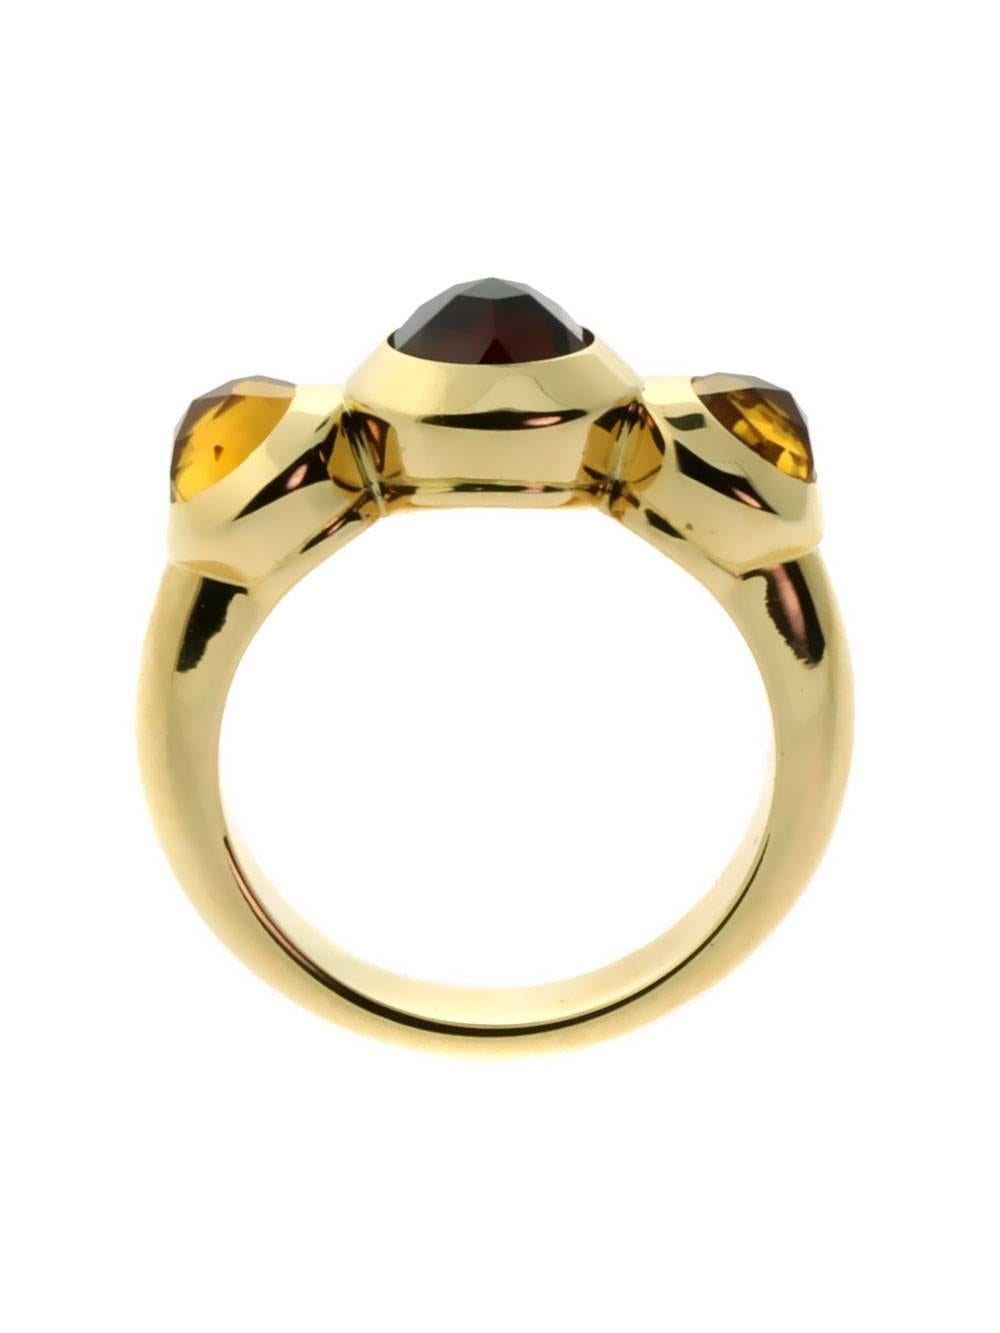 A chic authentic Tiffany & Co ring featuring Citrine and Garnet in radiant 18k yellow gold.

Size: US 5
Dimensions: 8.5mm Wide (.33″ Inches)

Inventory ID: 0000006